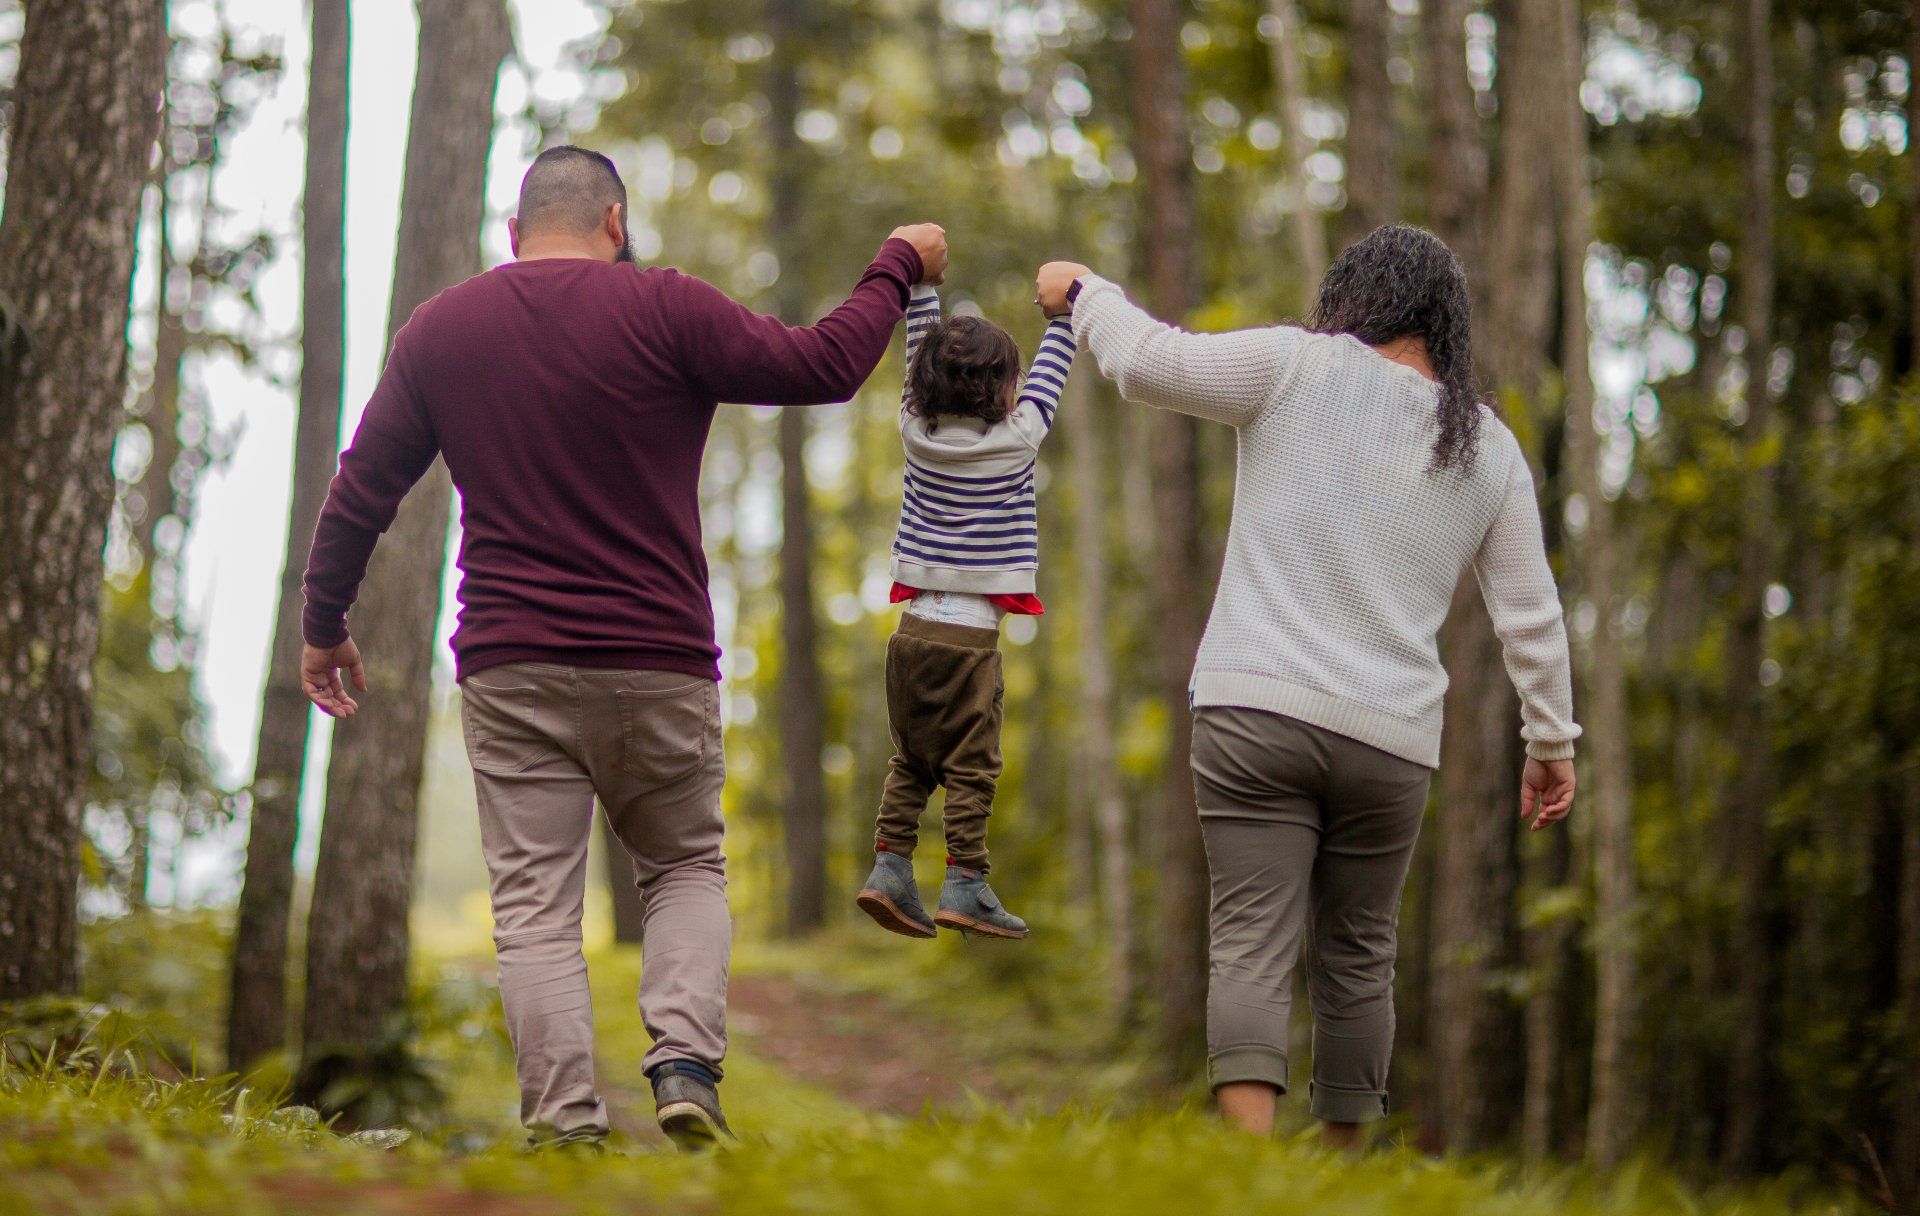 A family is walking through the woods holding hands.